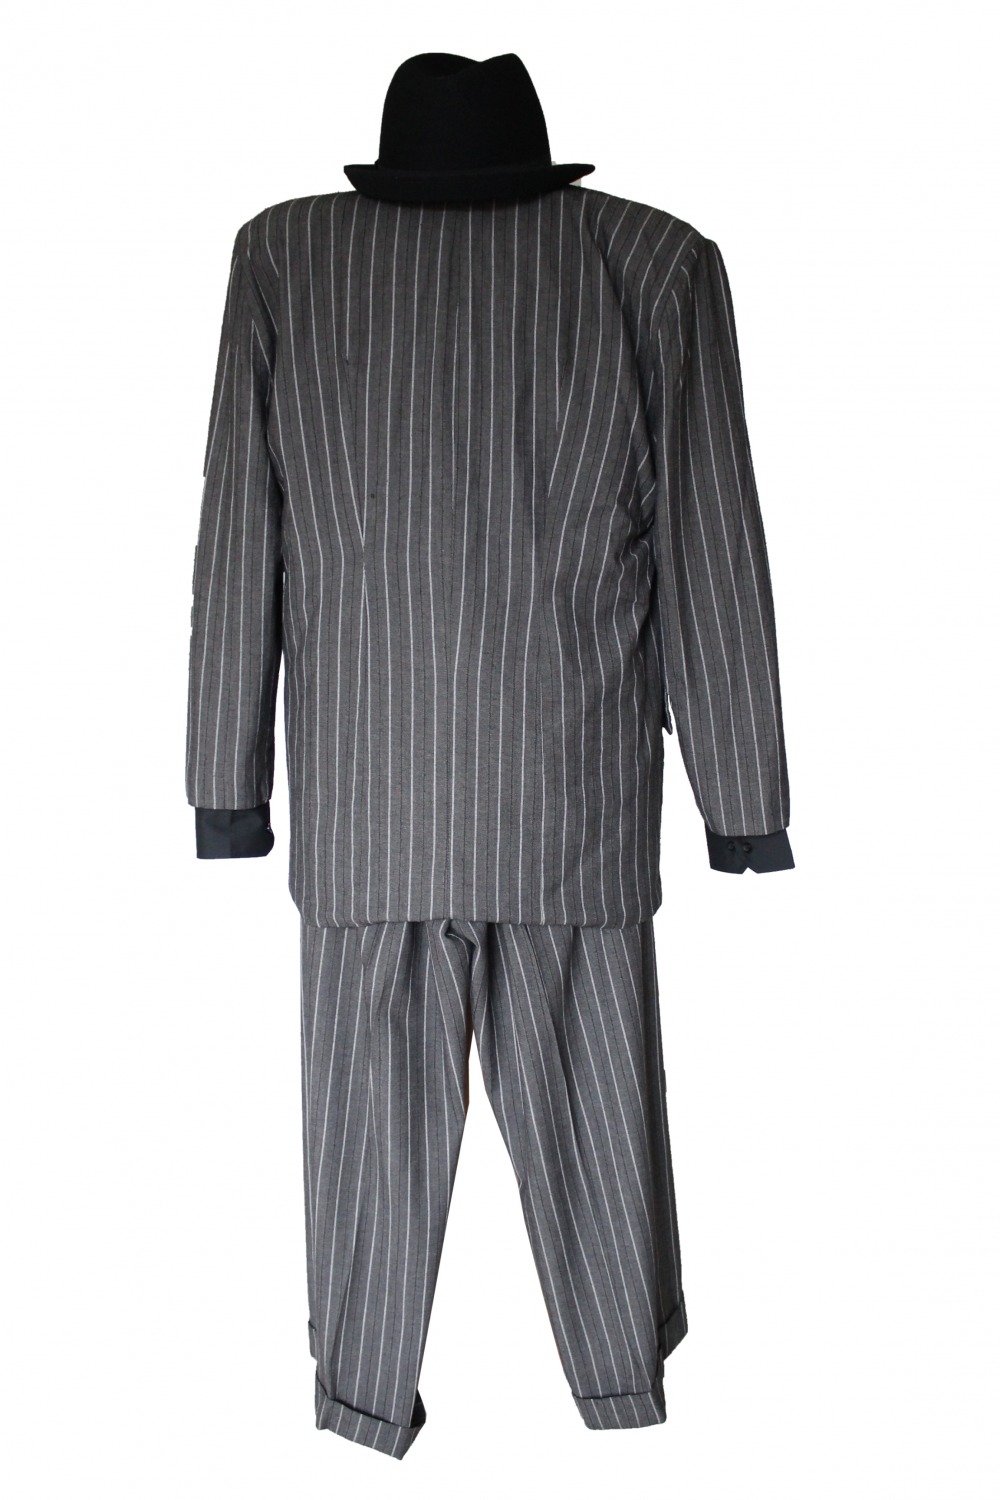 Mens 1920s 1930s Gangster Blues Brothers Costume Size L / XL Image